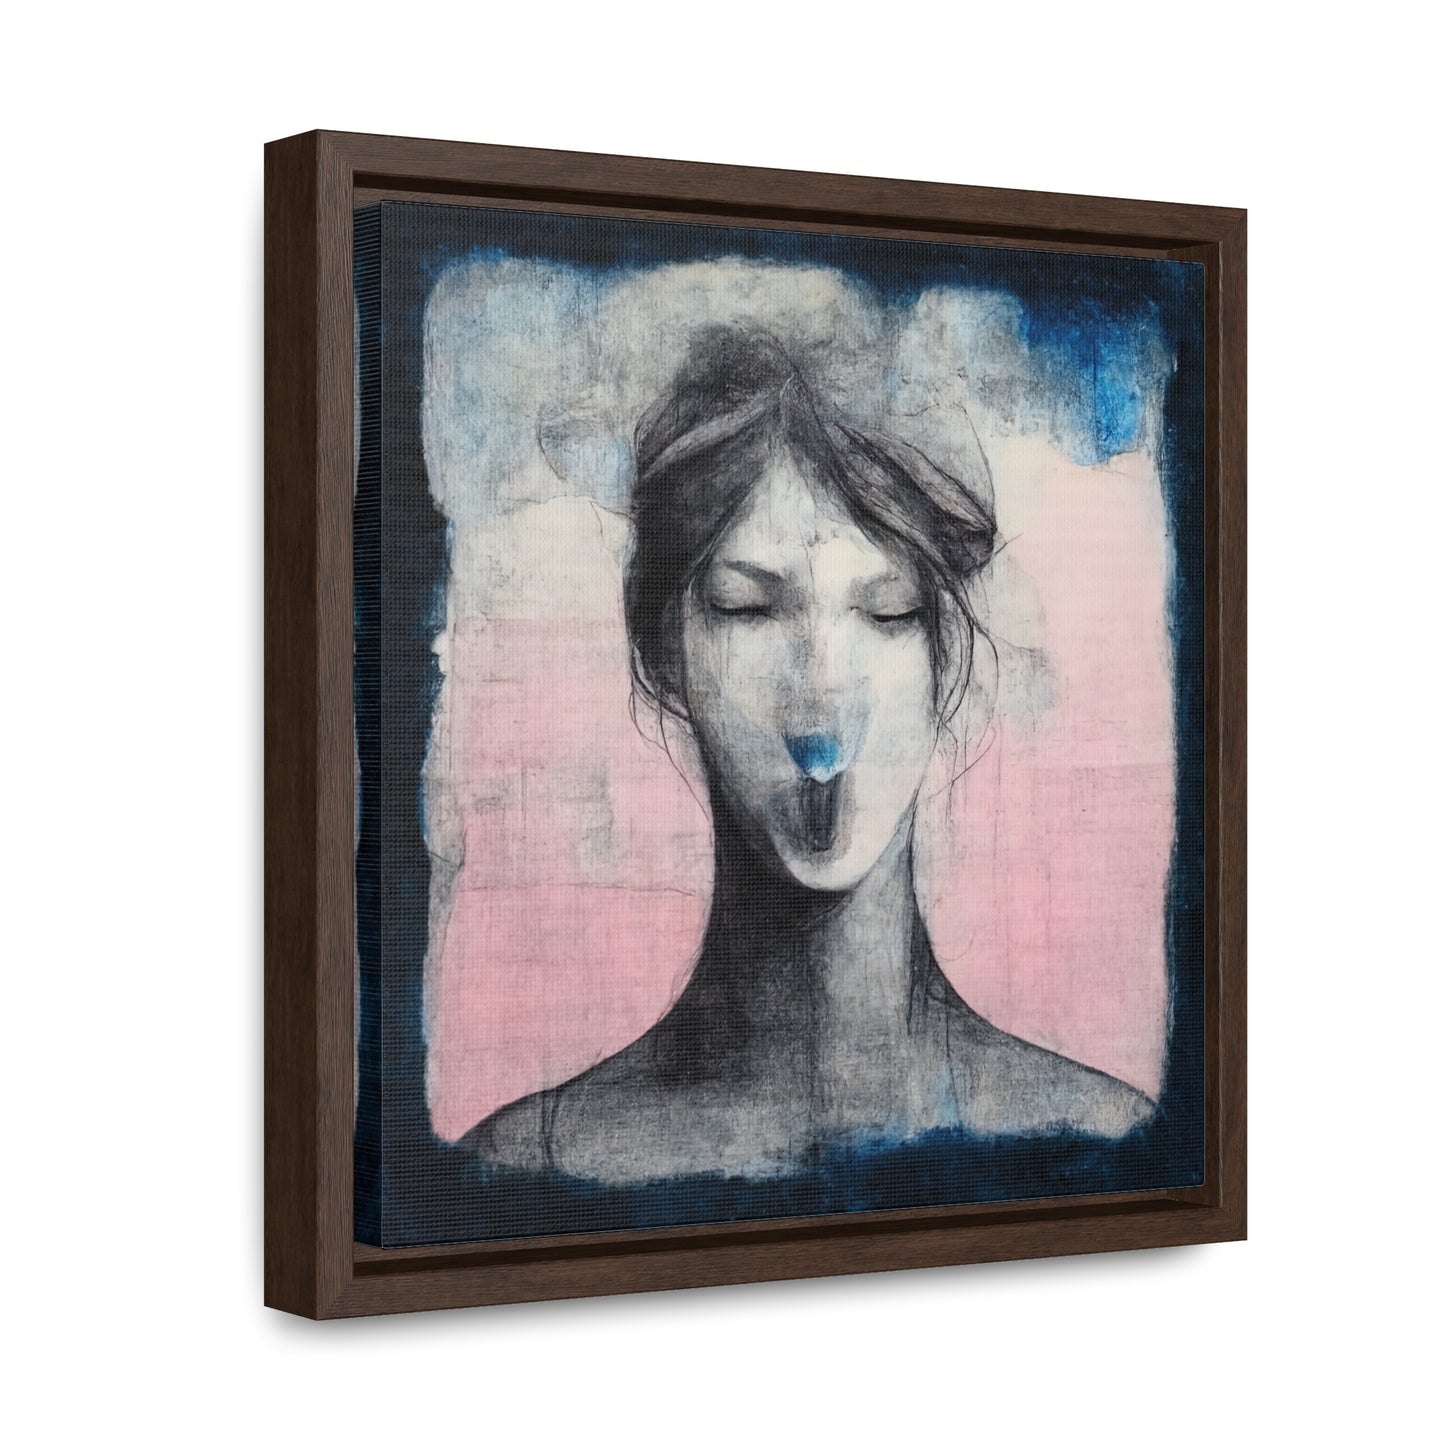 Girls from Mars 35, Valentinii, Gallery Canvas Wraps, Square Frame